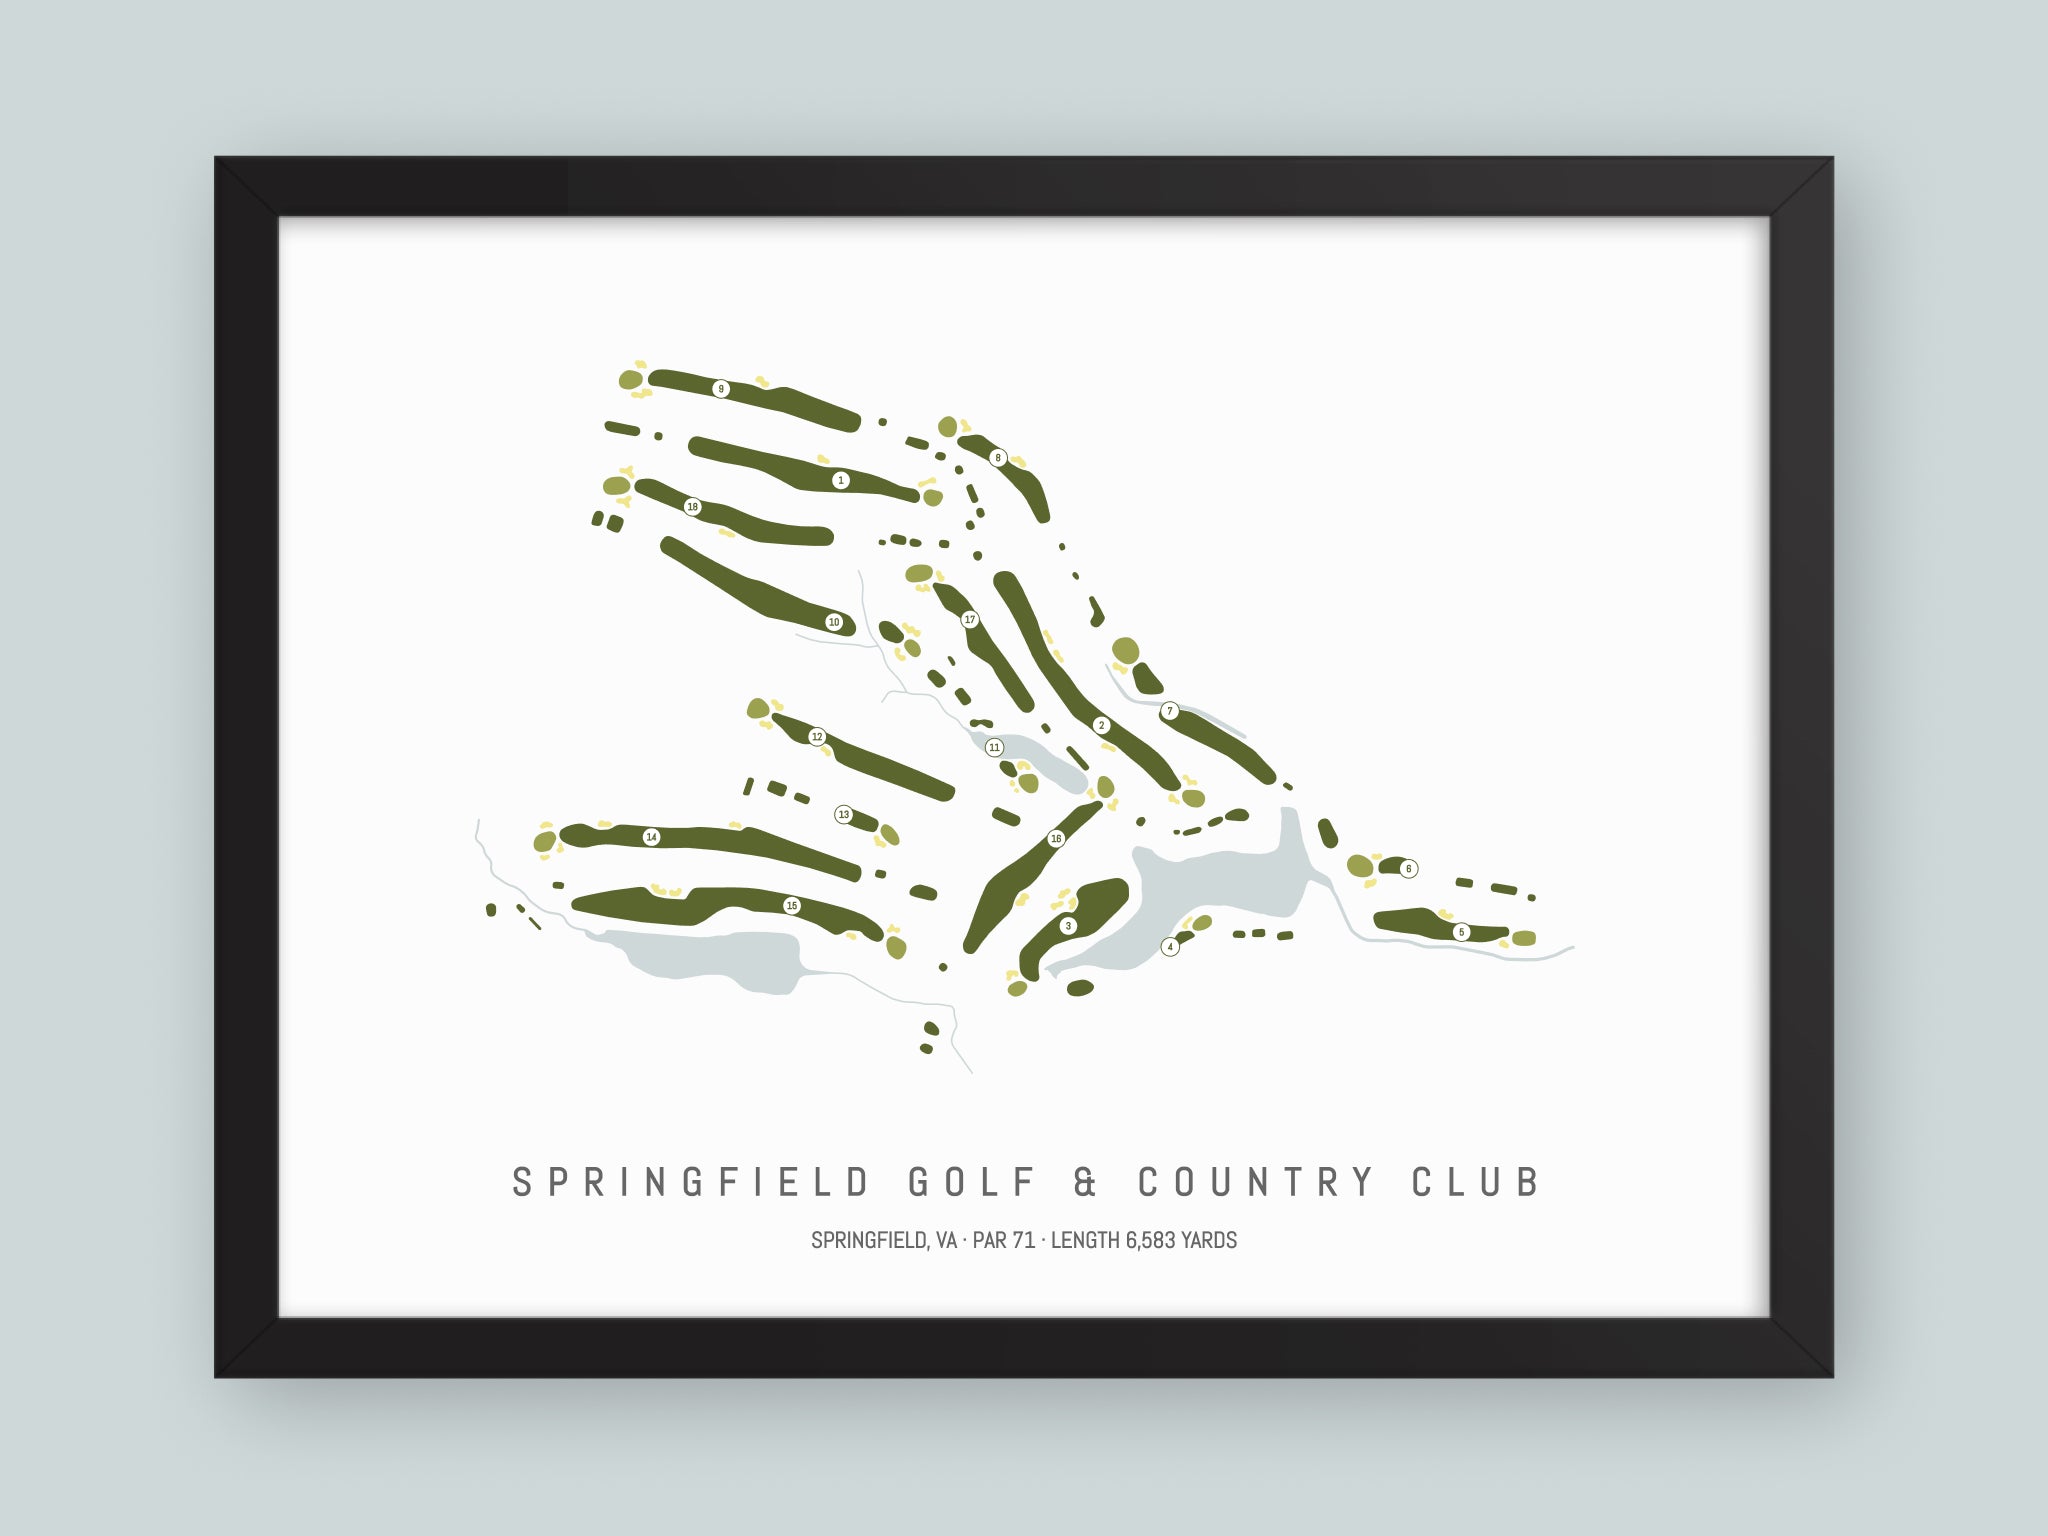 Springfield-Golf-And-Country-Club-VA--Black-Frame-24x18-With-Hole-Numbers